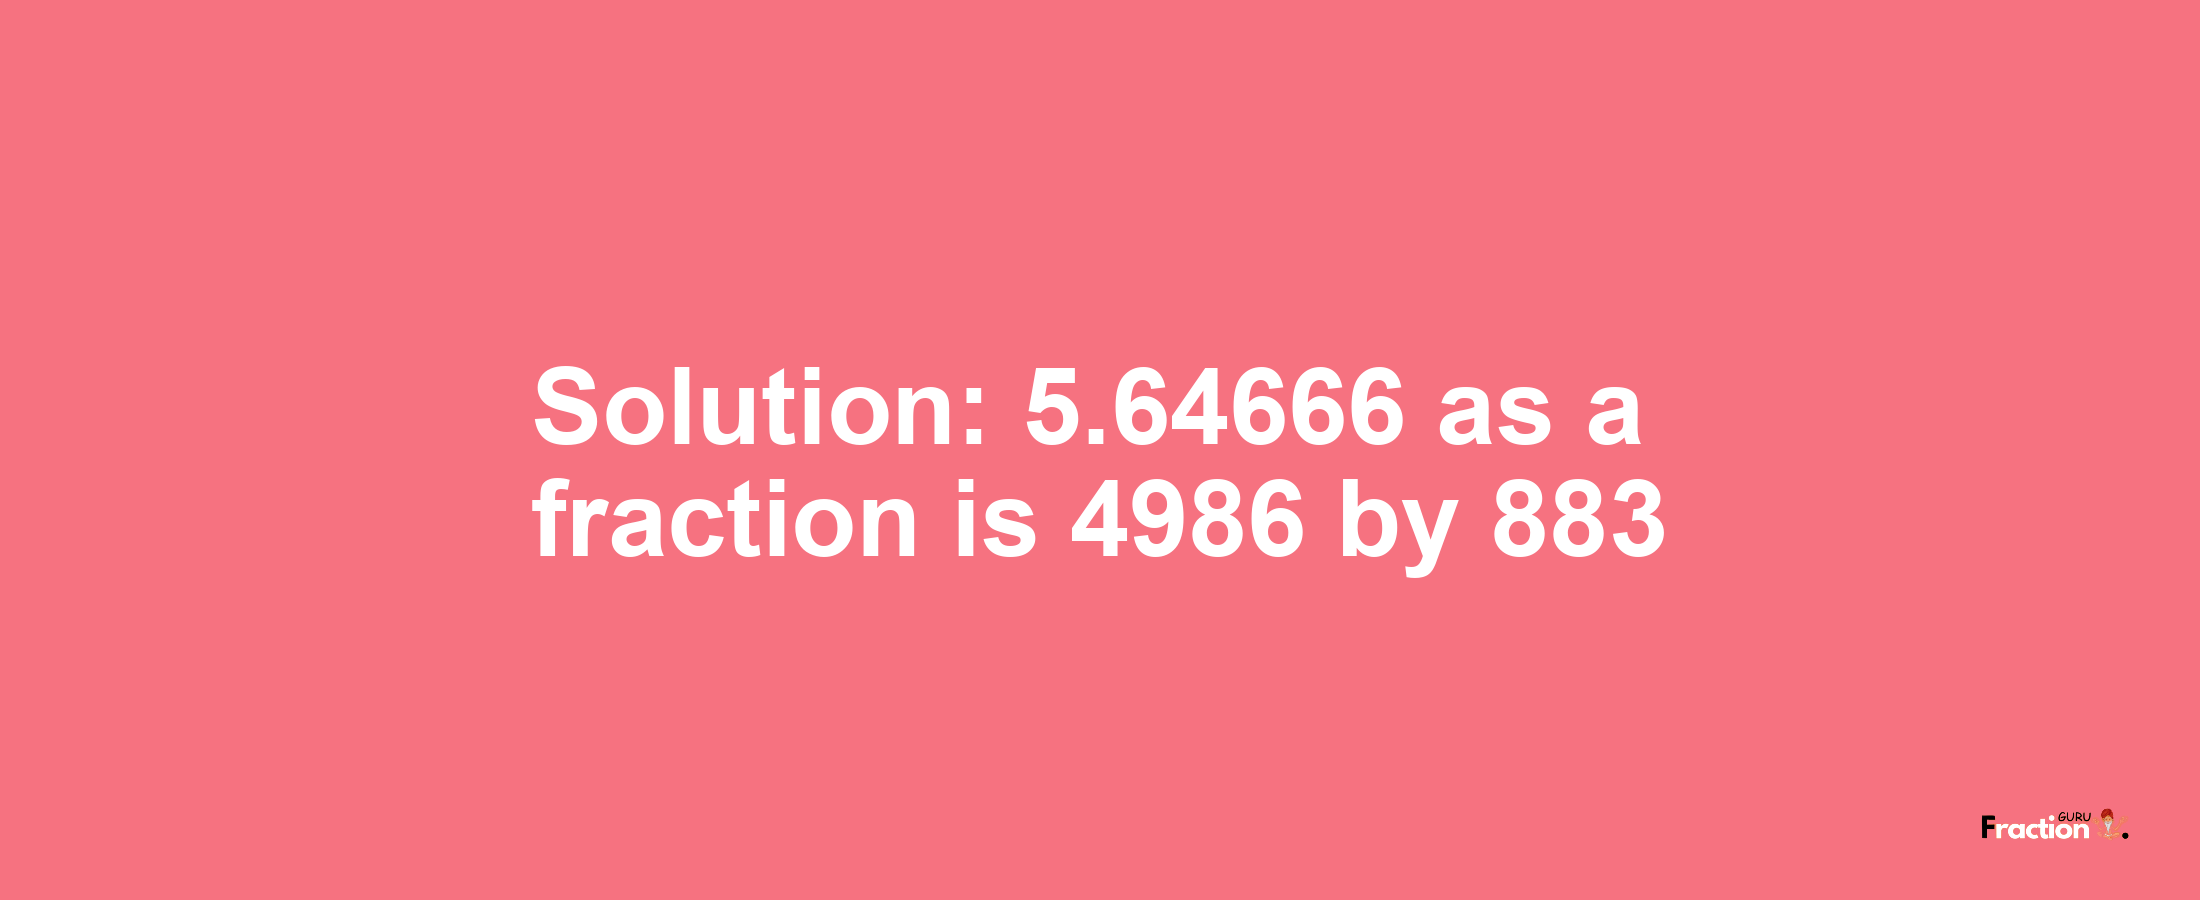 Solution:5.64666 as a fraction is 4986/883